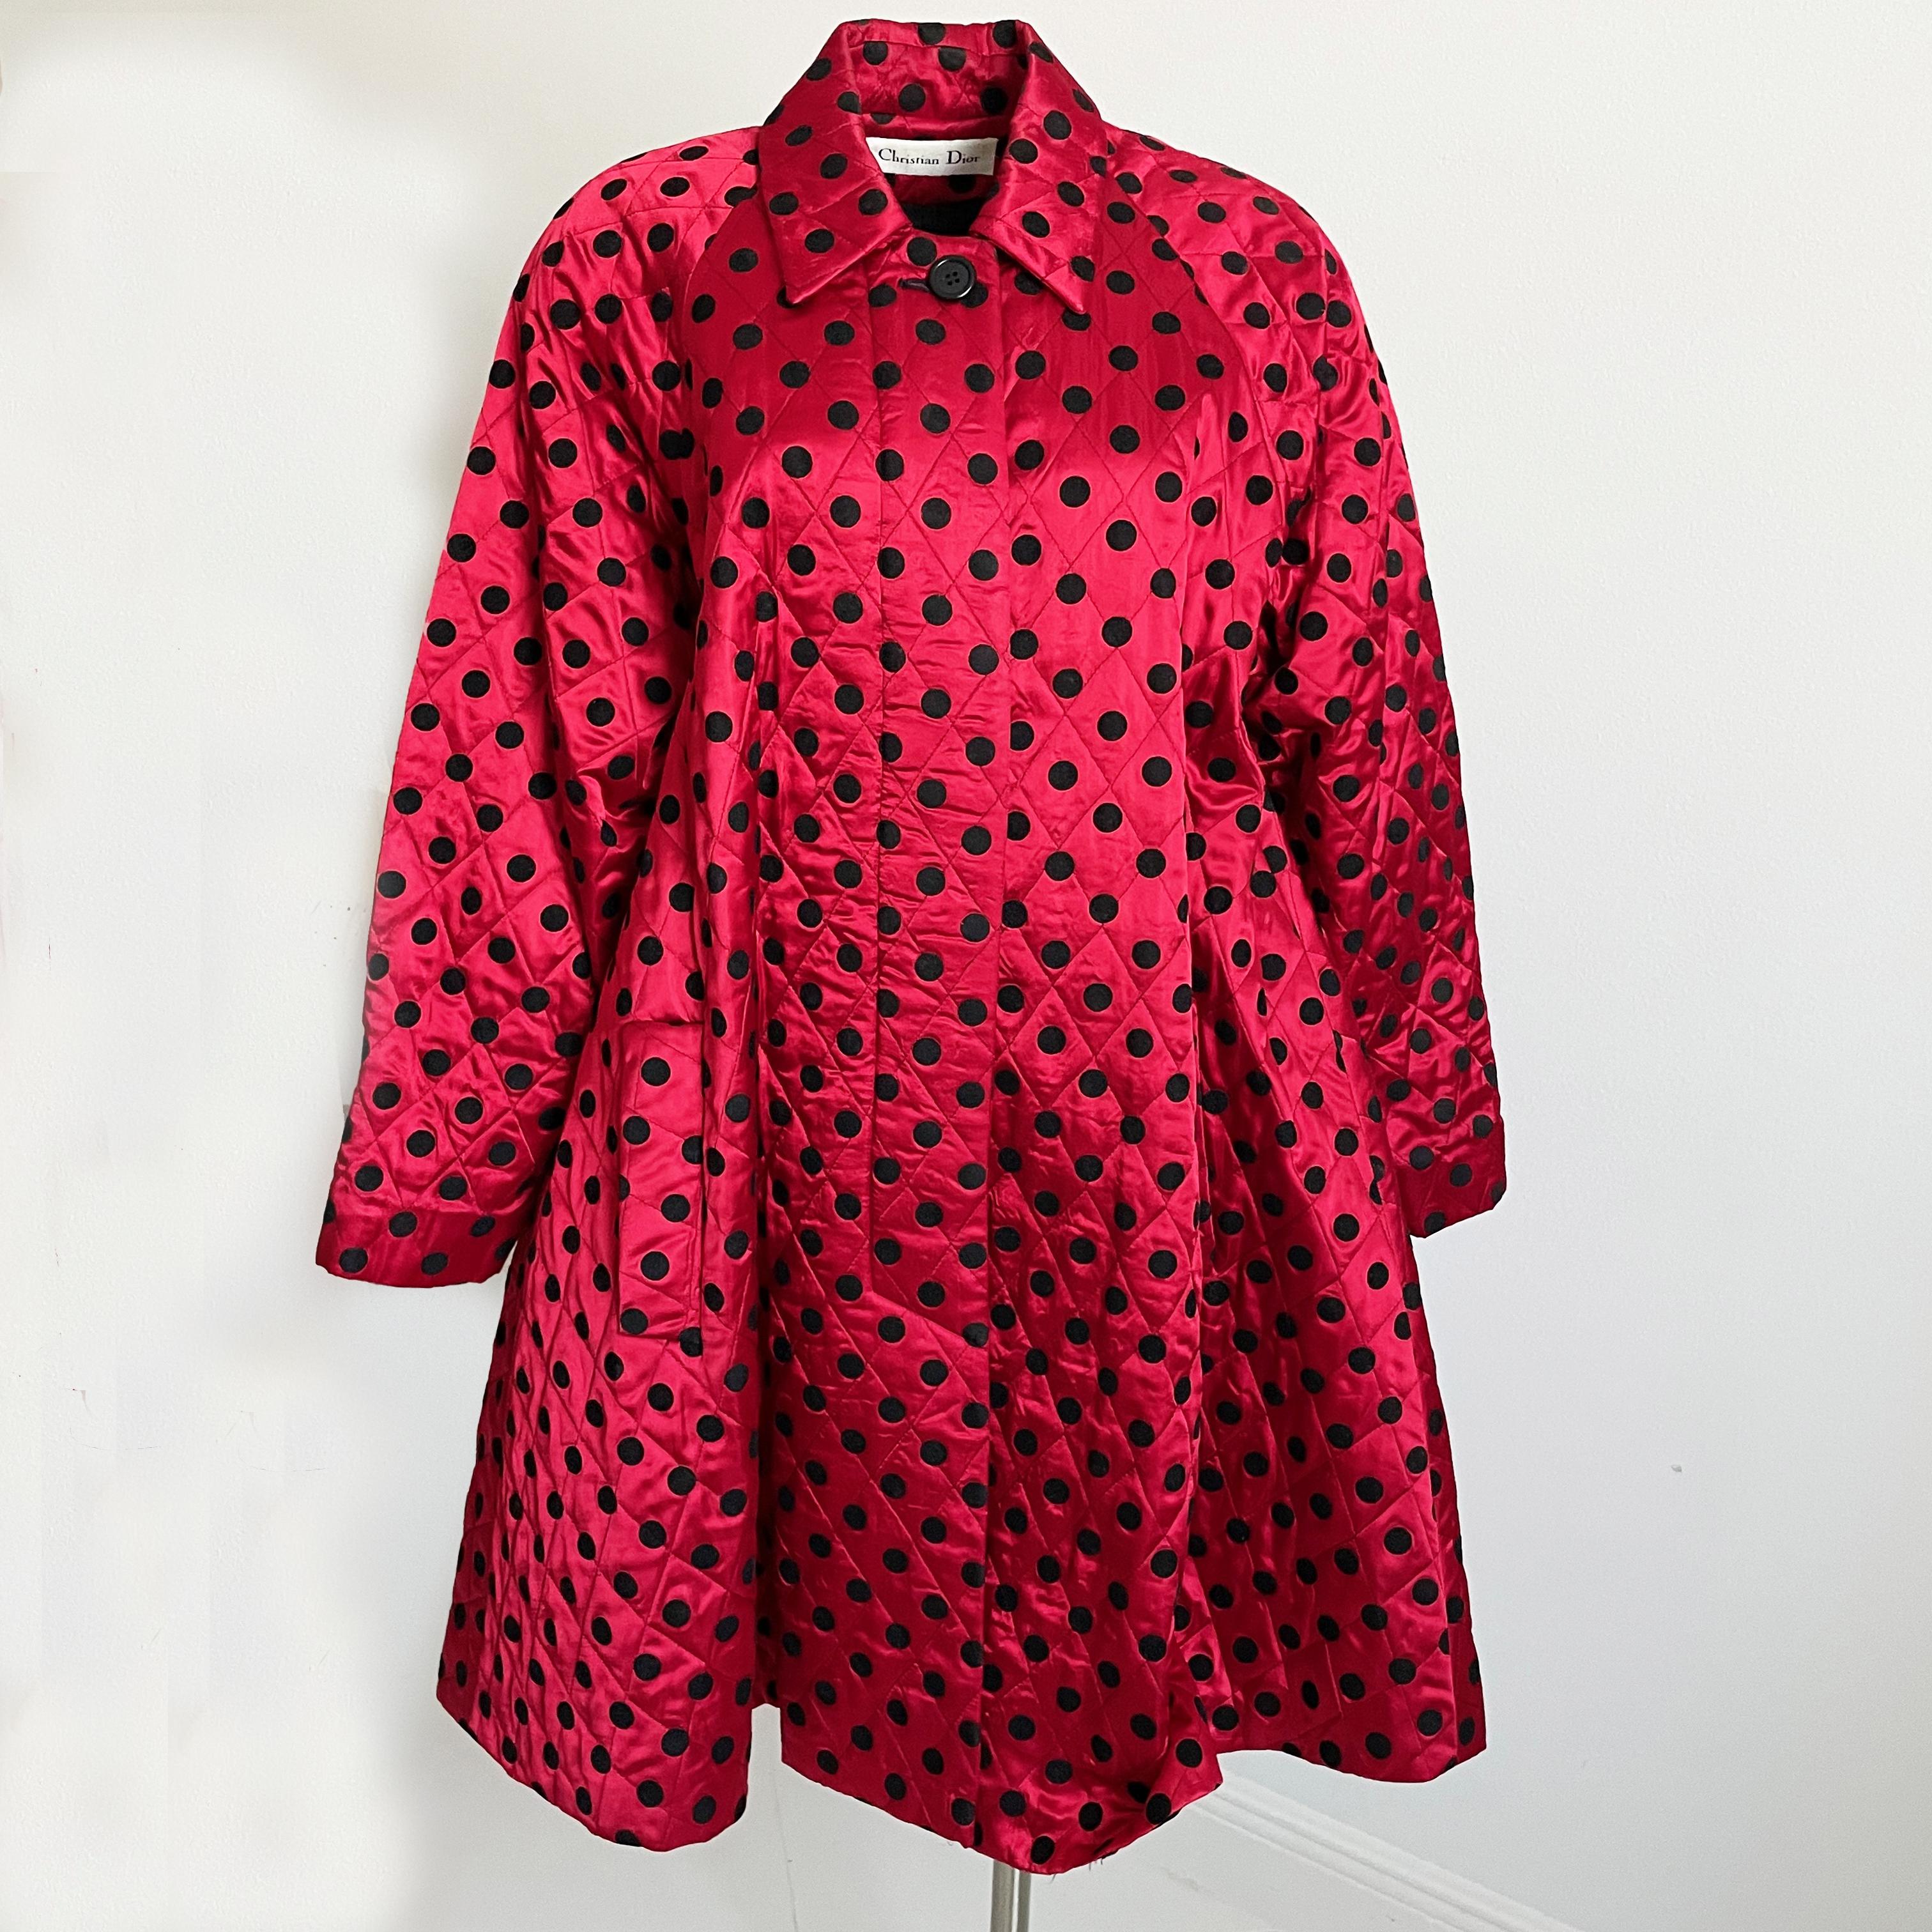 Christian Dior Coat Swing Style Red Satin Black Polka Dot Evening Wear Vintage  In Good Condition For Sale In Port Saint Lucie, FL